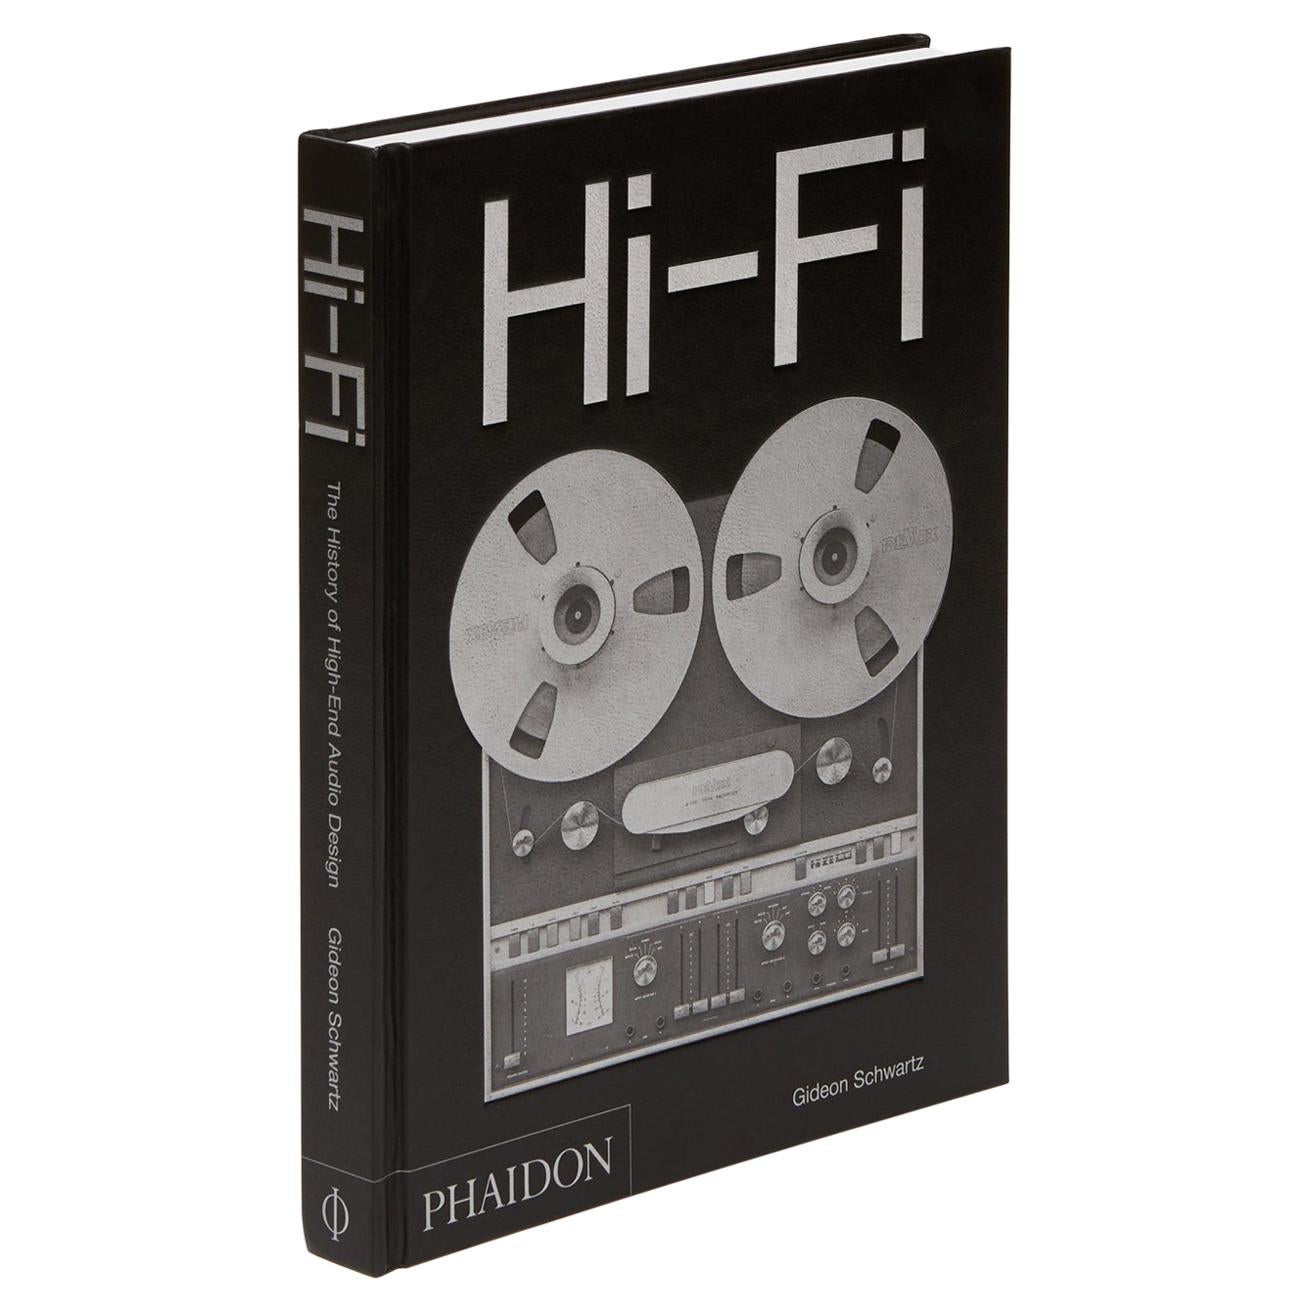 "Hi-Fi The History of High-End Audio Design" Book